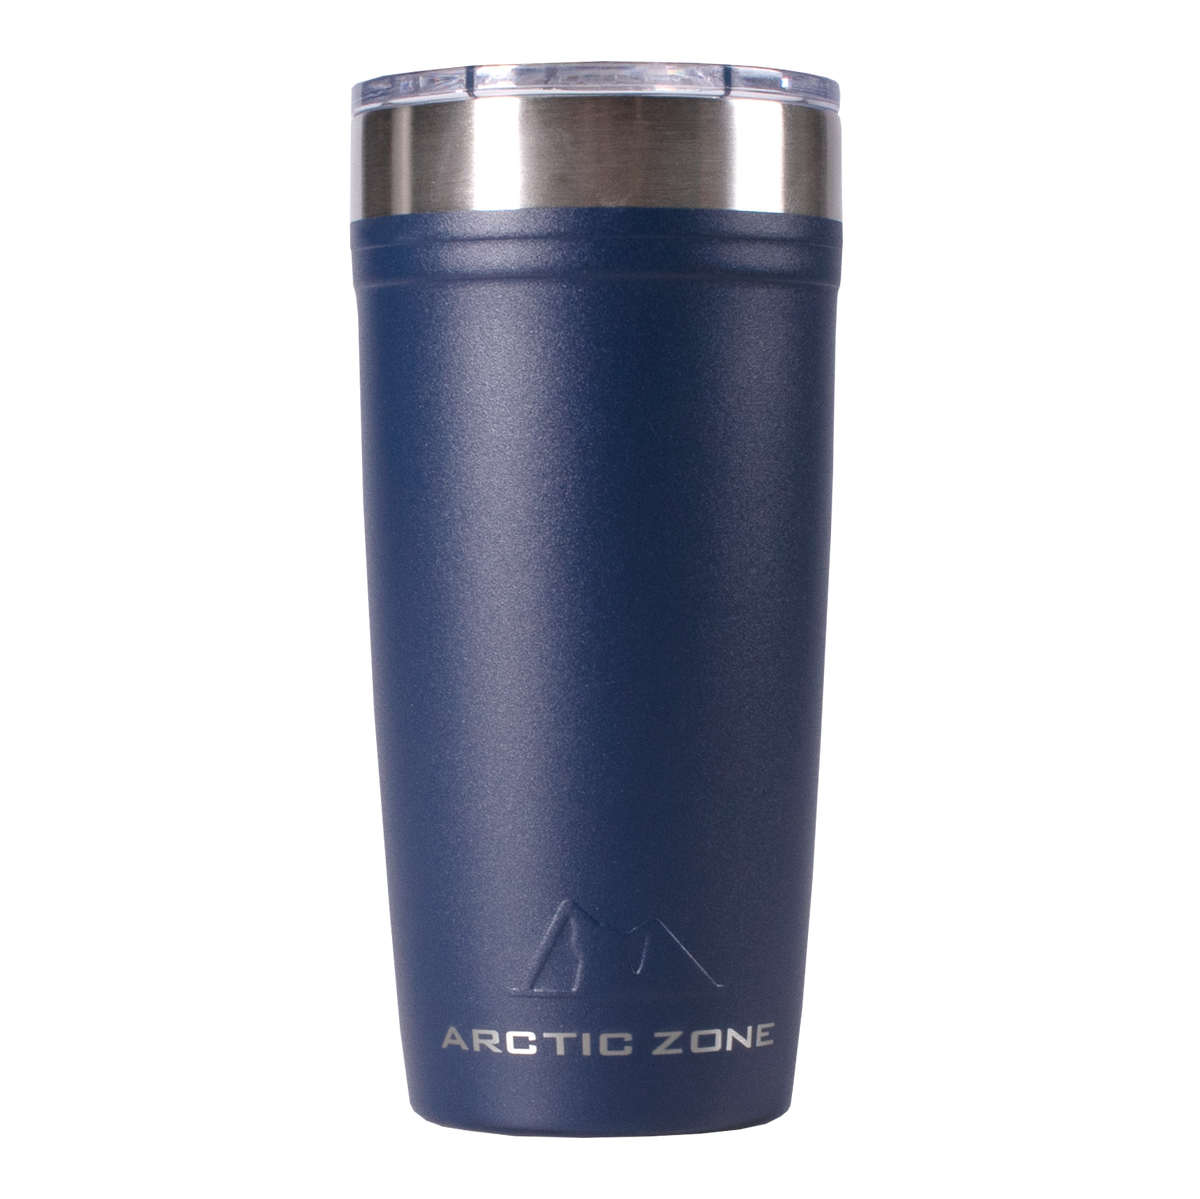 Navy Arctic zone tumbler showing ARCTIC ZONE logo near the bottom on side